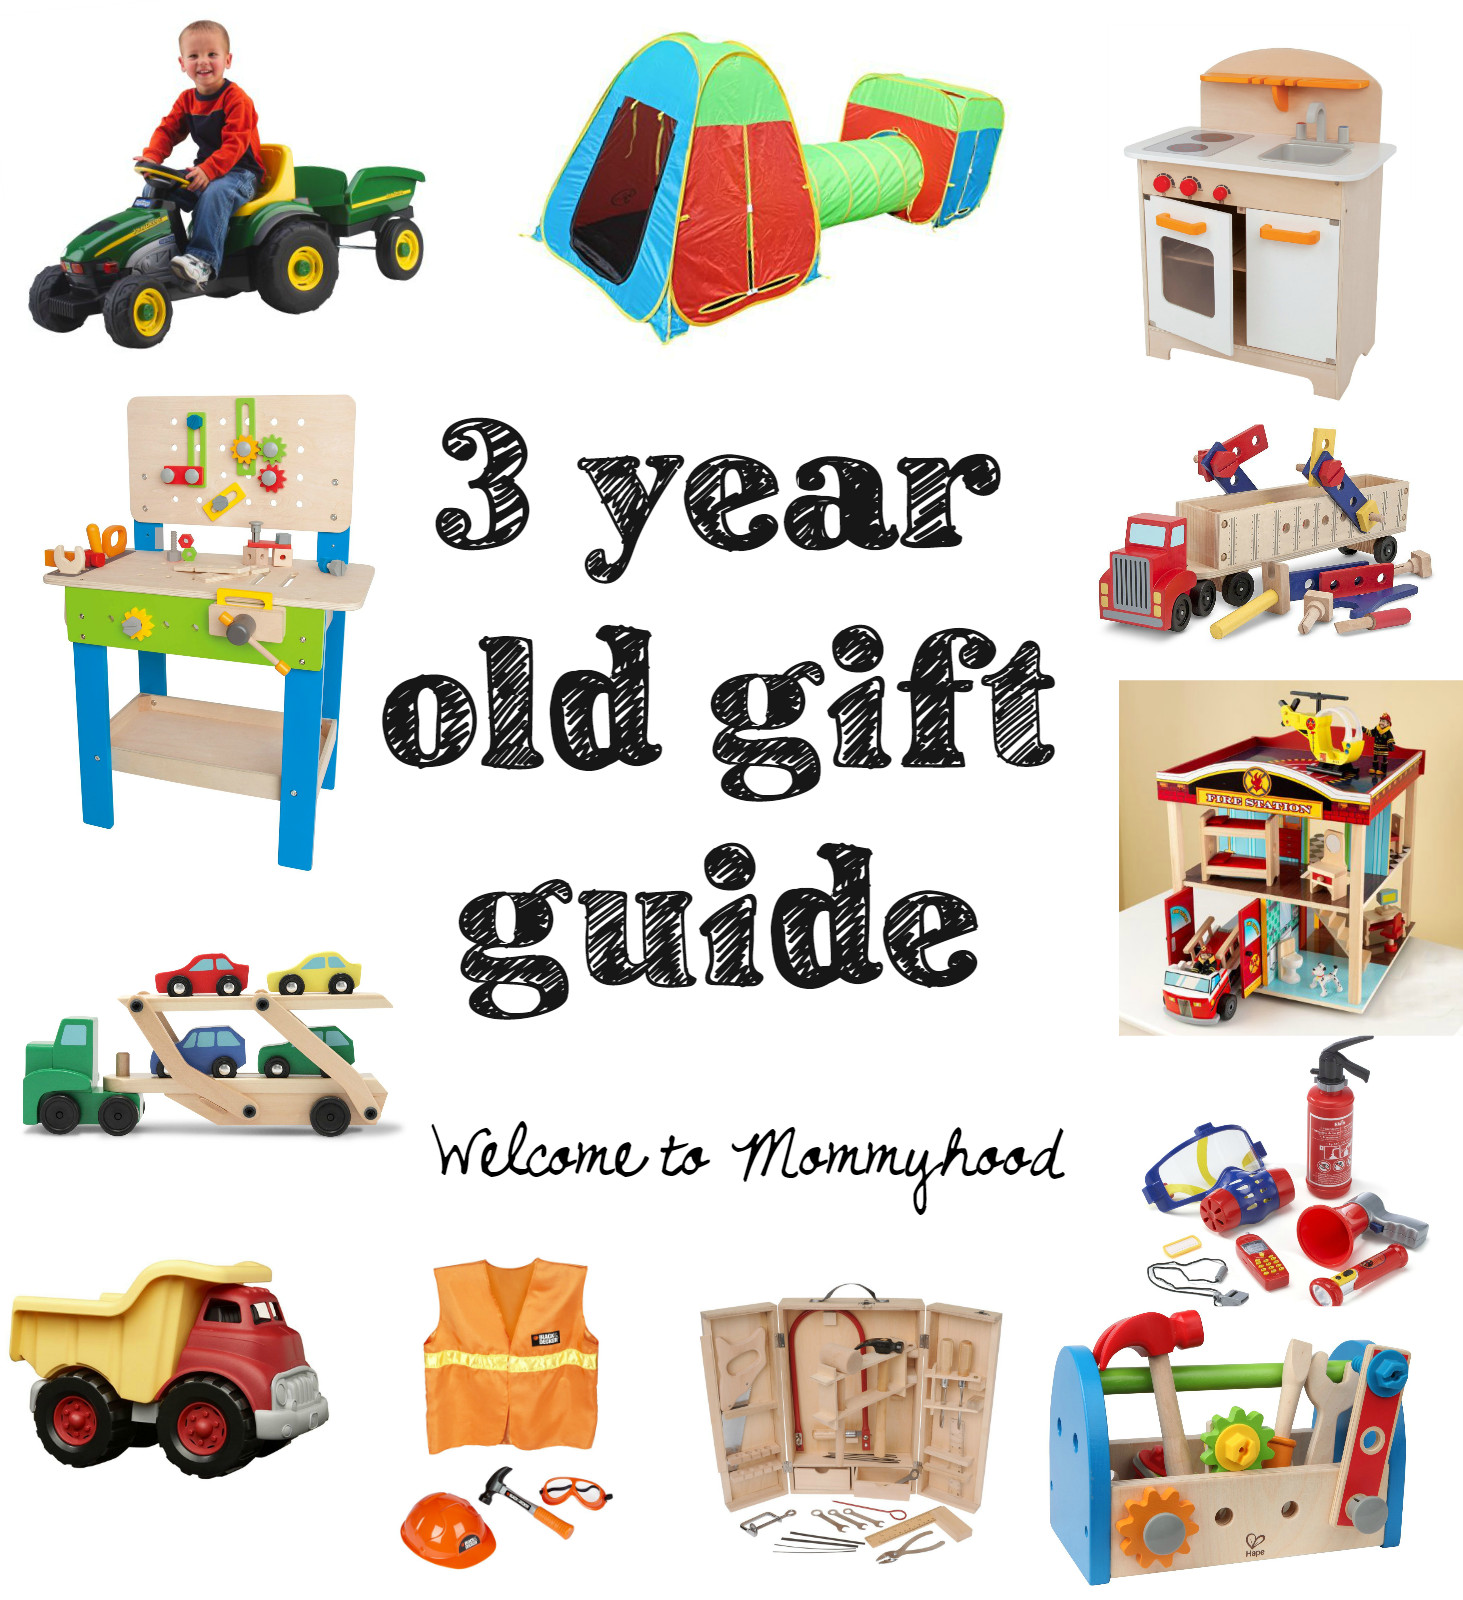 2 Year Old Boy Birthday Gift Ideas
 Gift guide for three year old boys from Wel e to